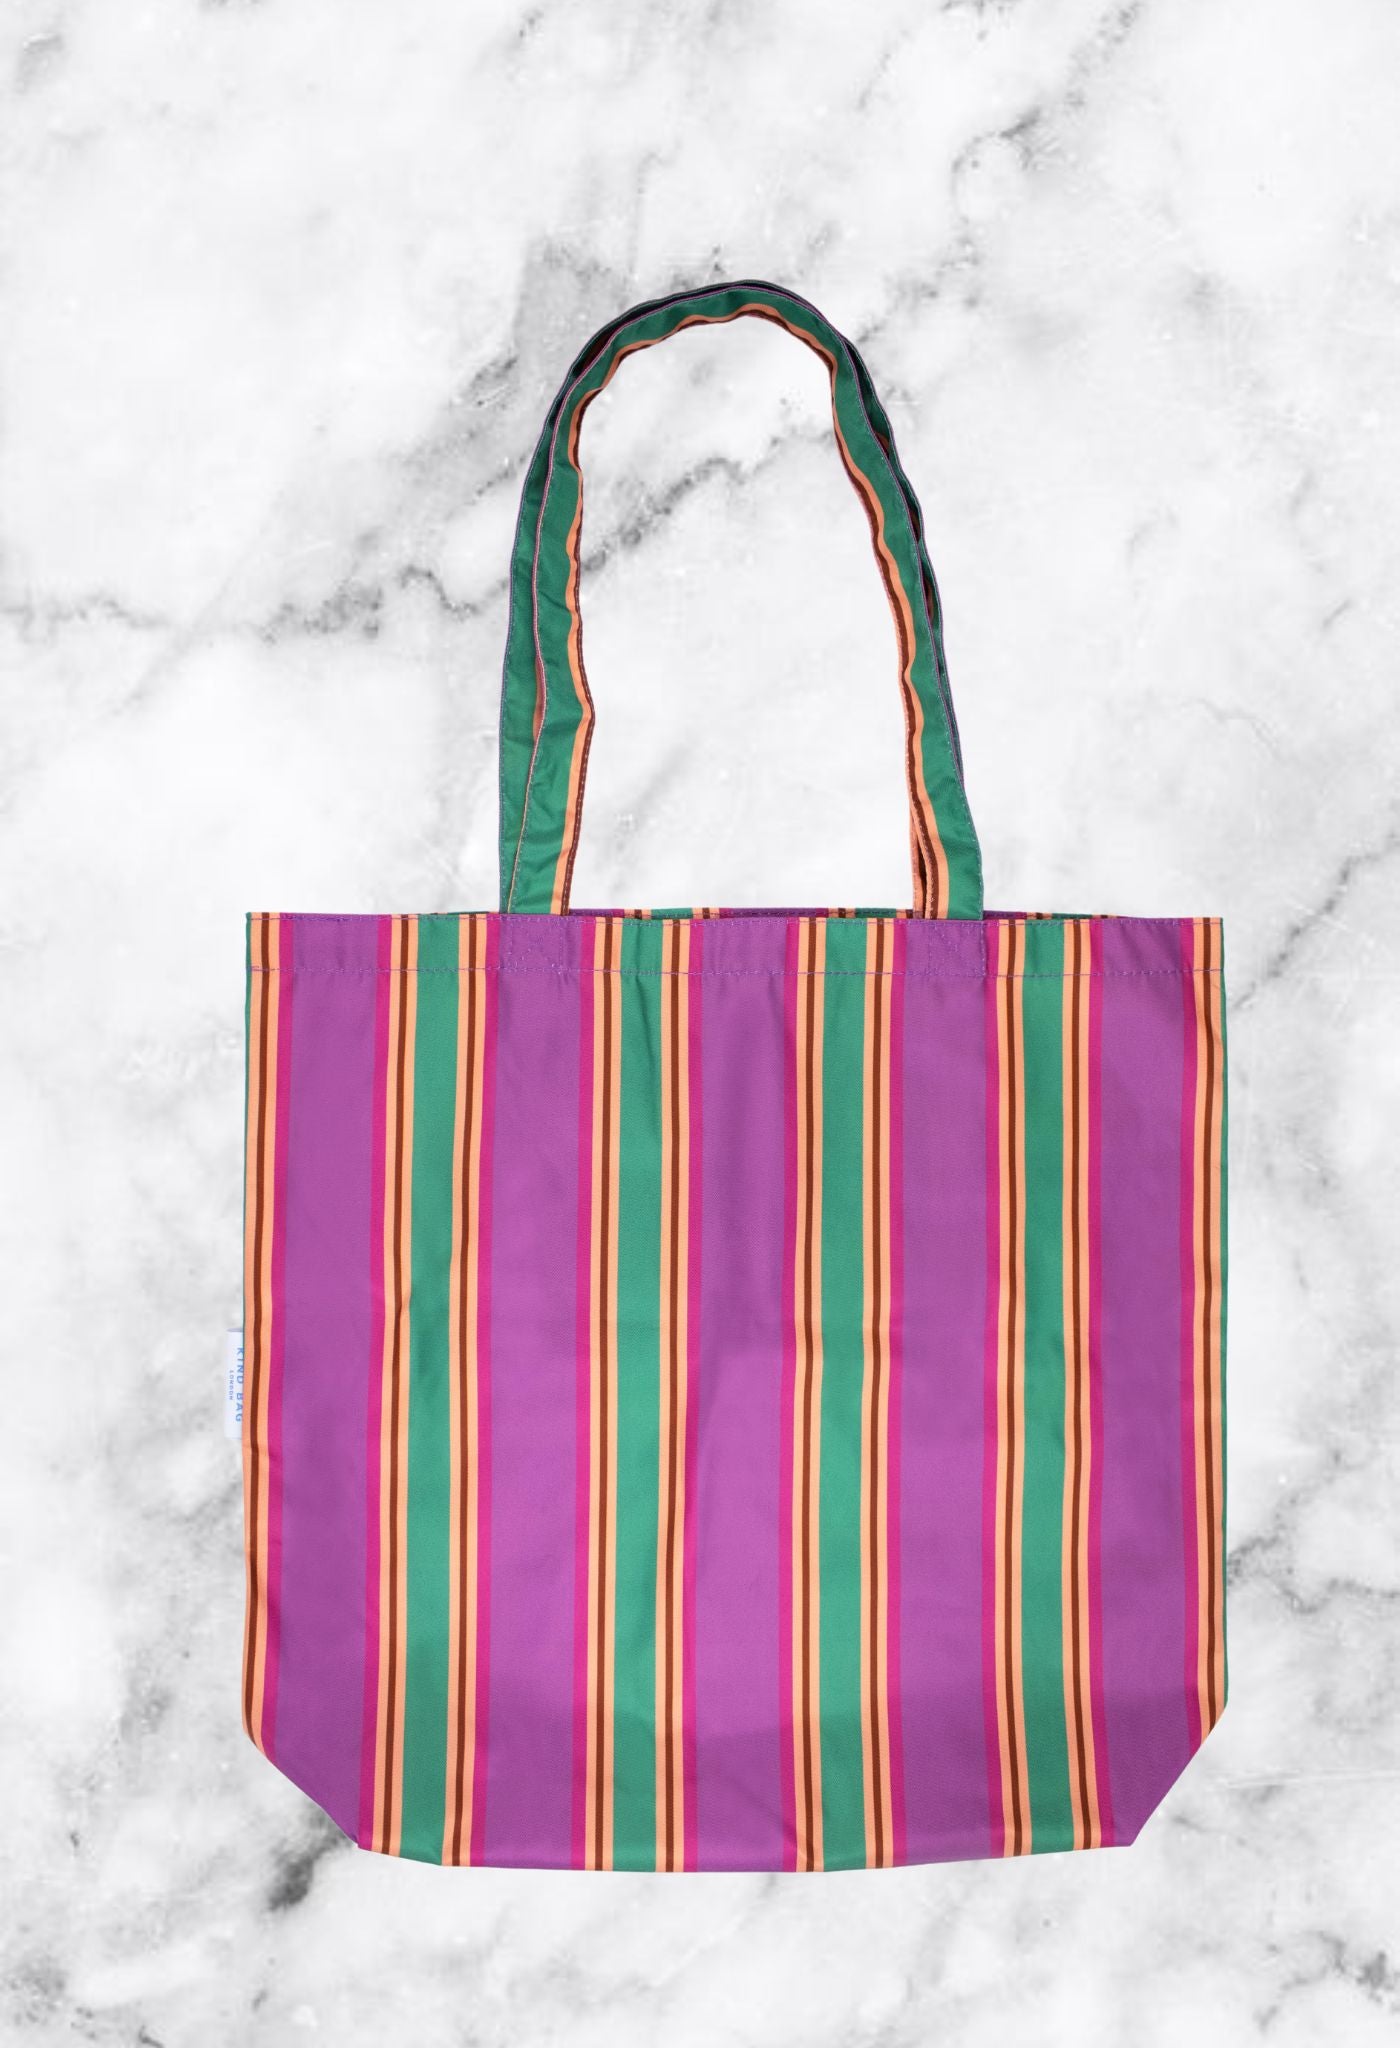 Kind Bag Recycled Totes